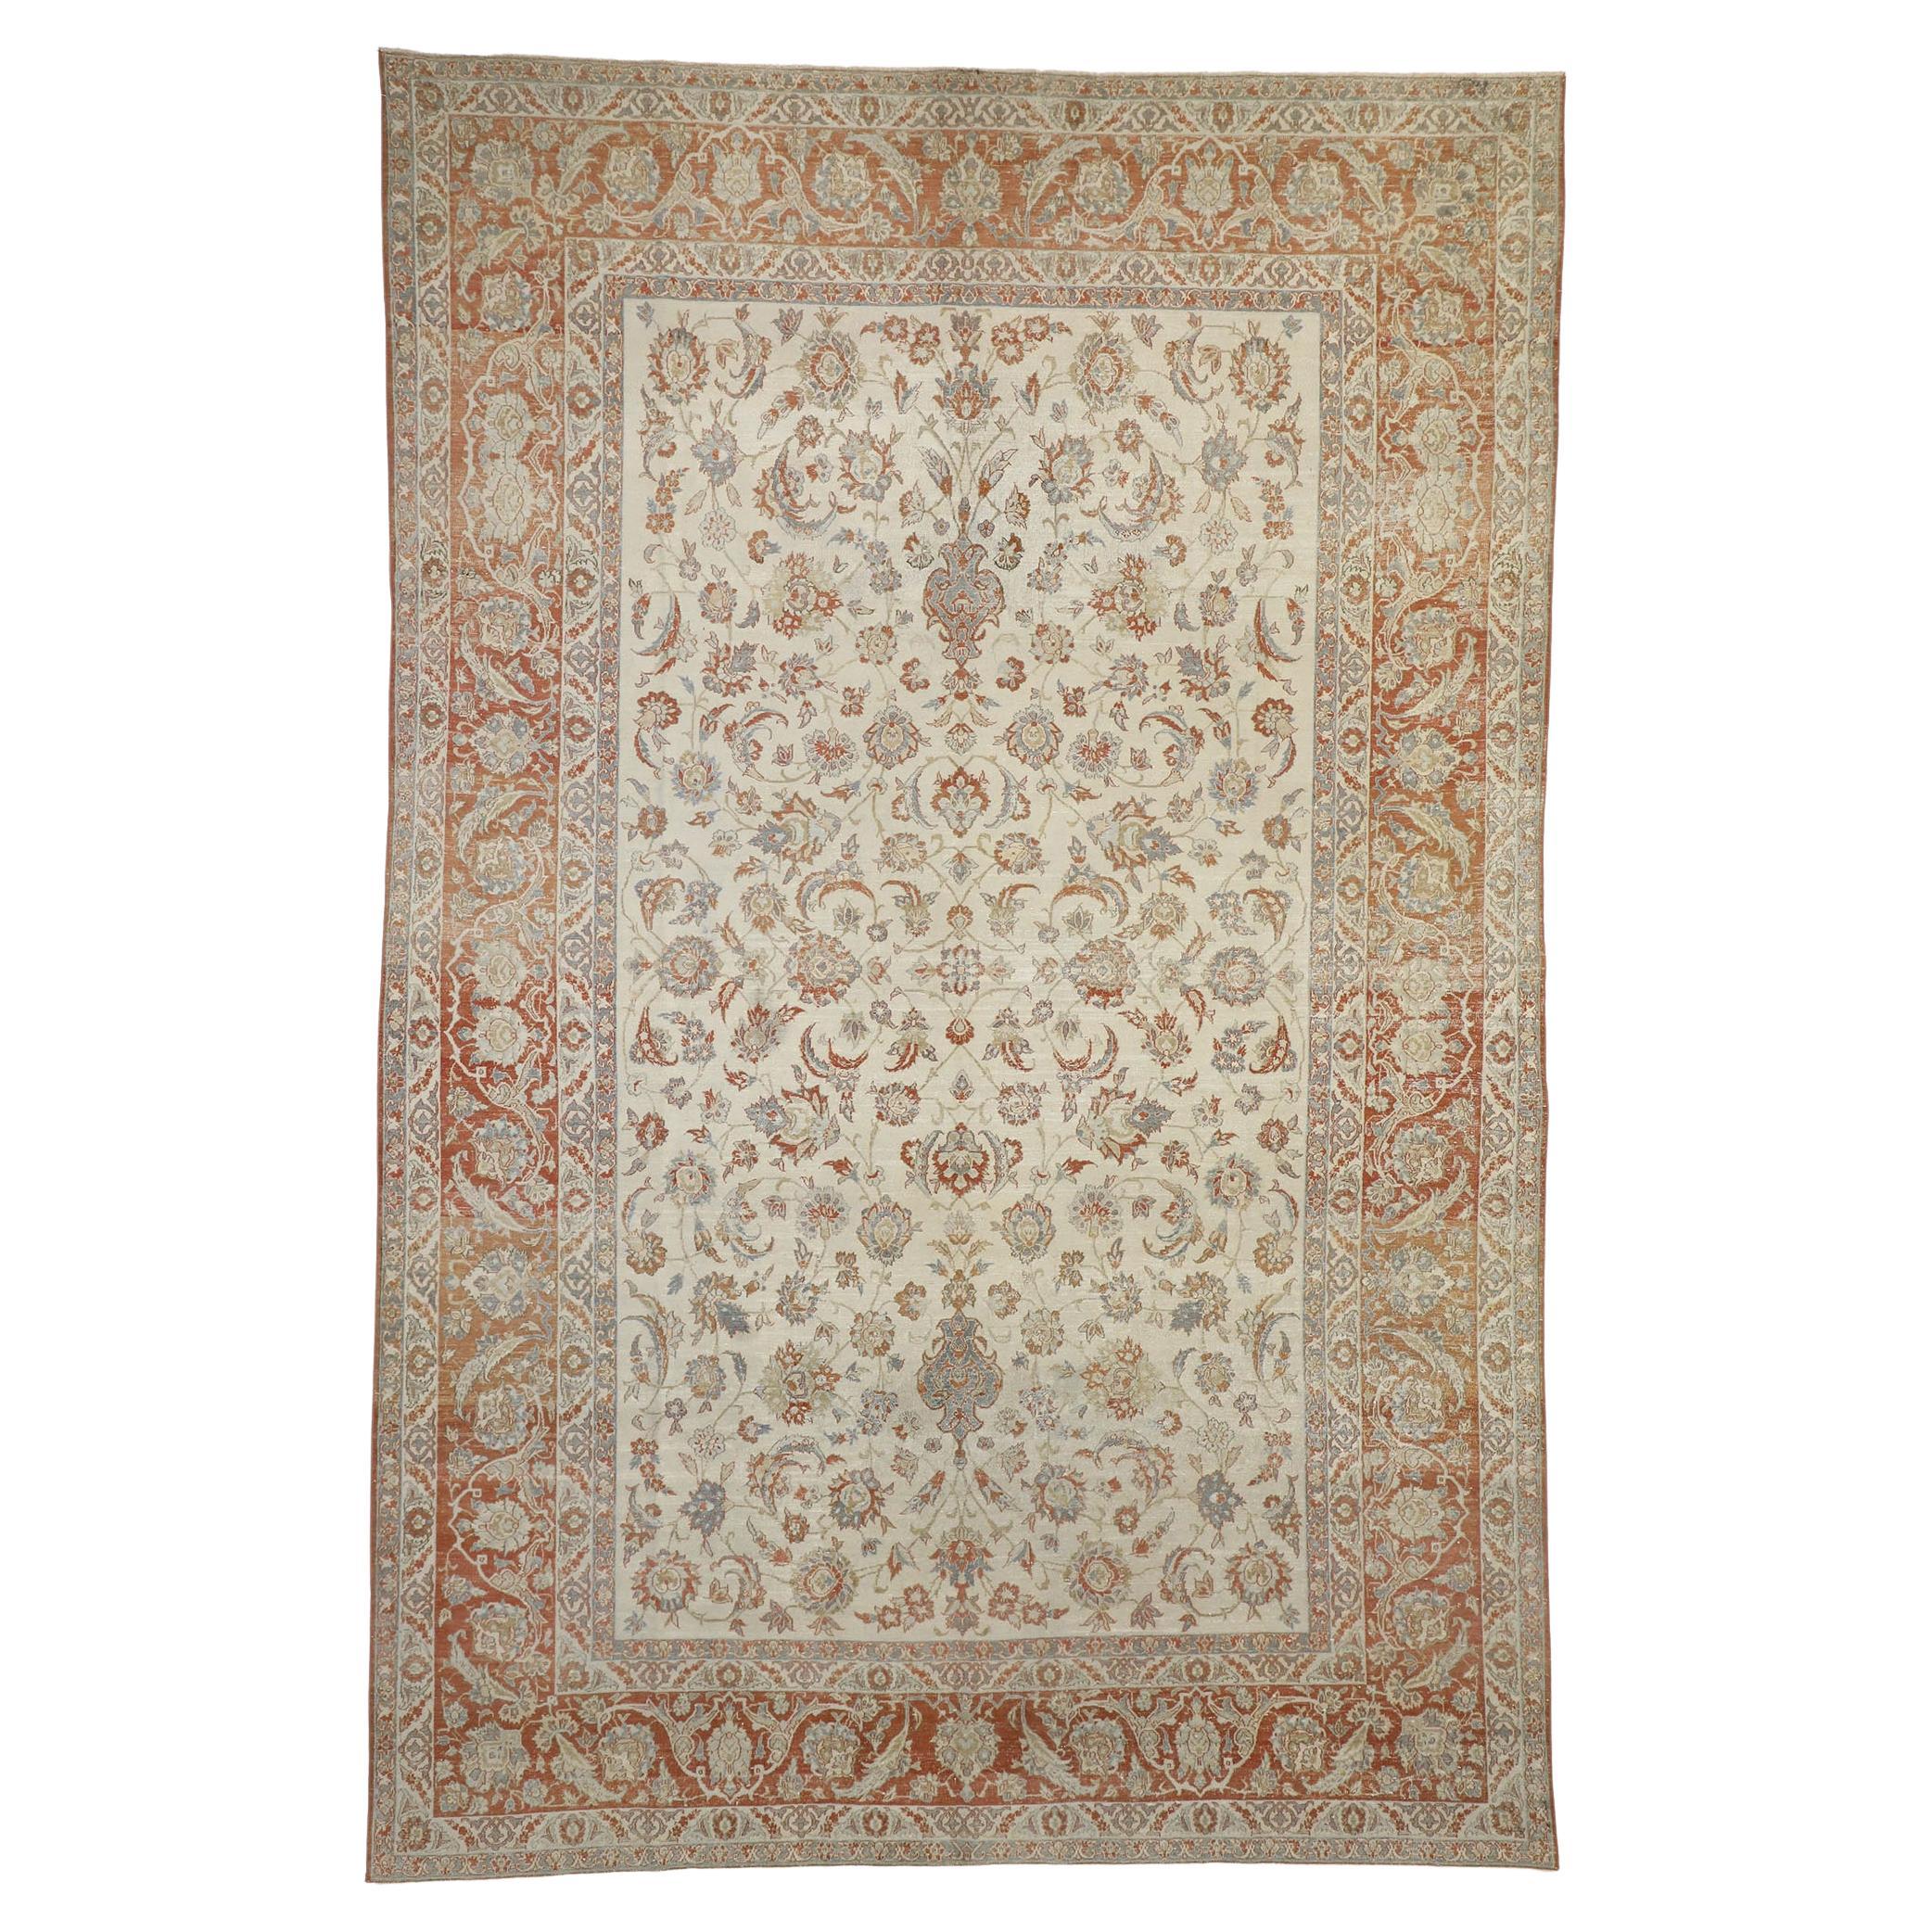 Distressed Antique Persian Isfahan Rug, Rustic Charm Meets Patriotic Flair